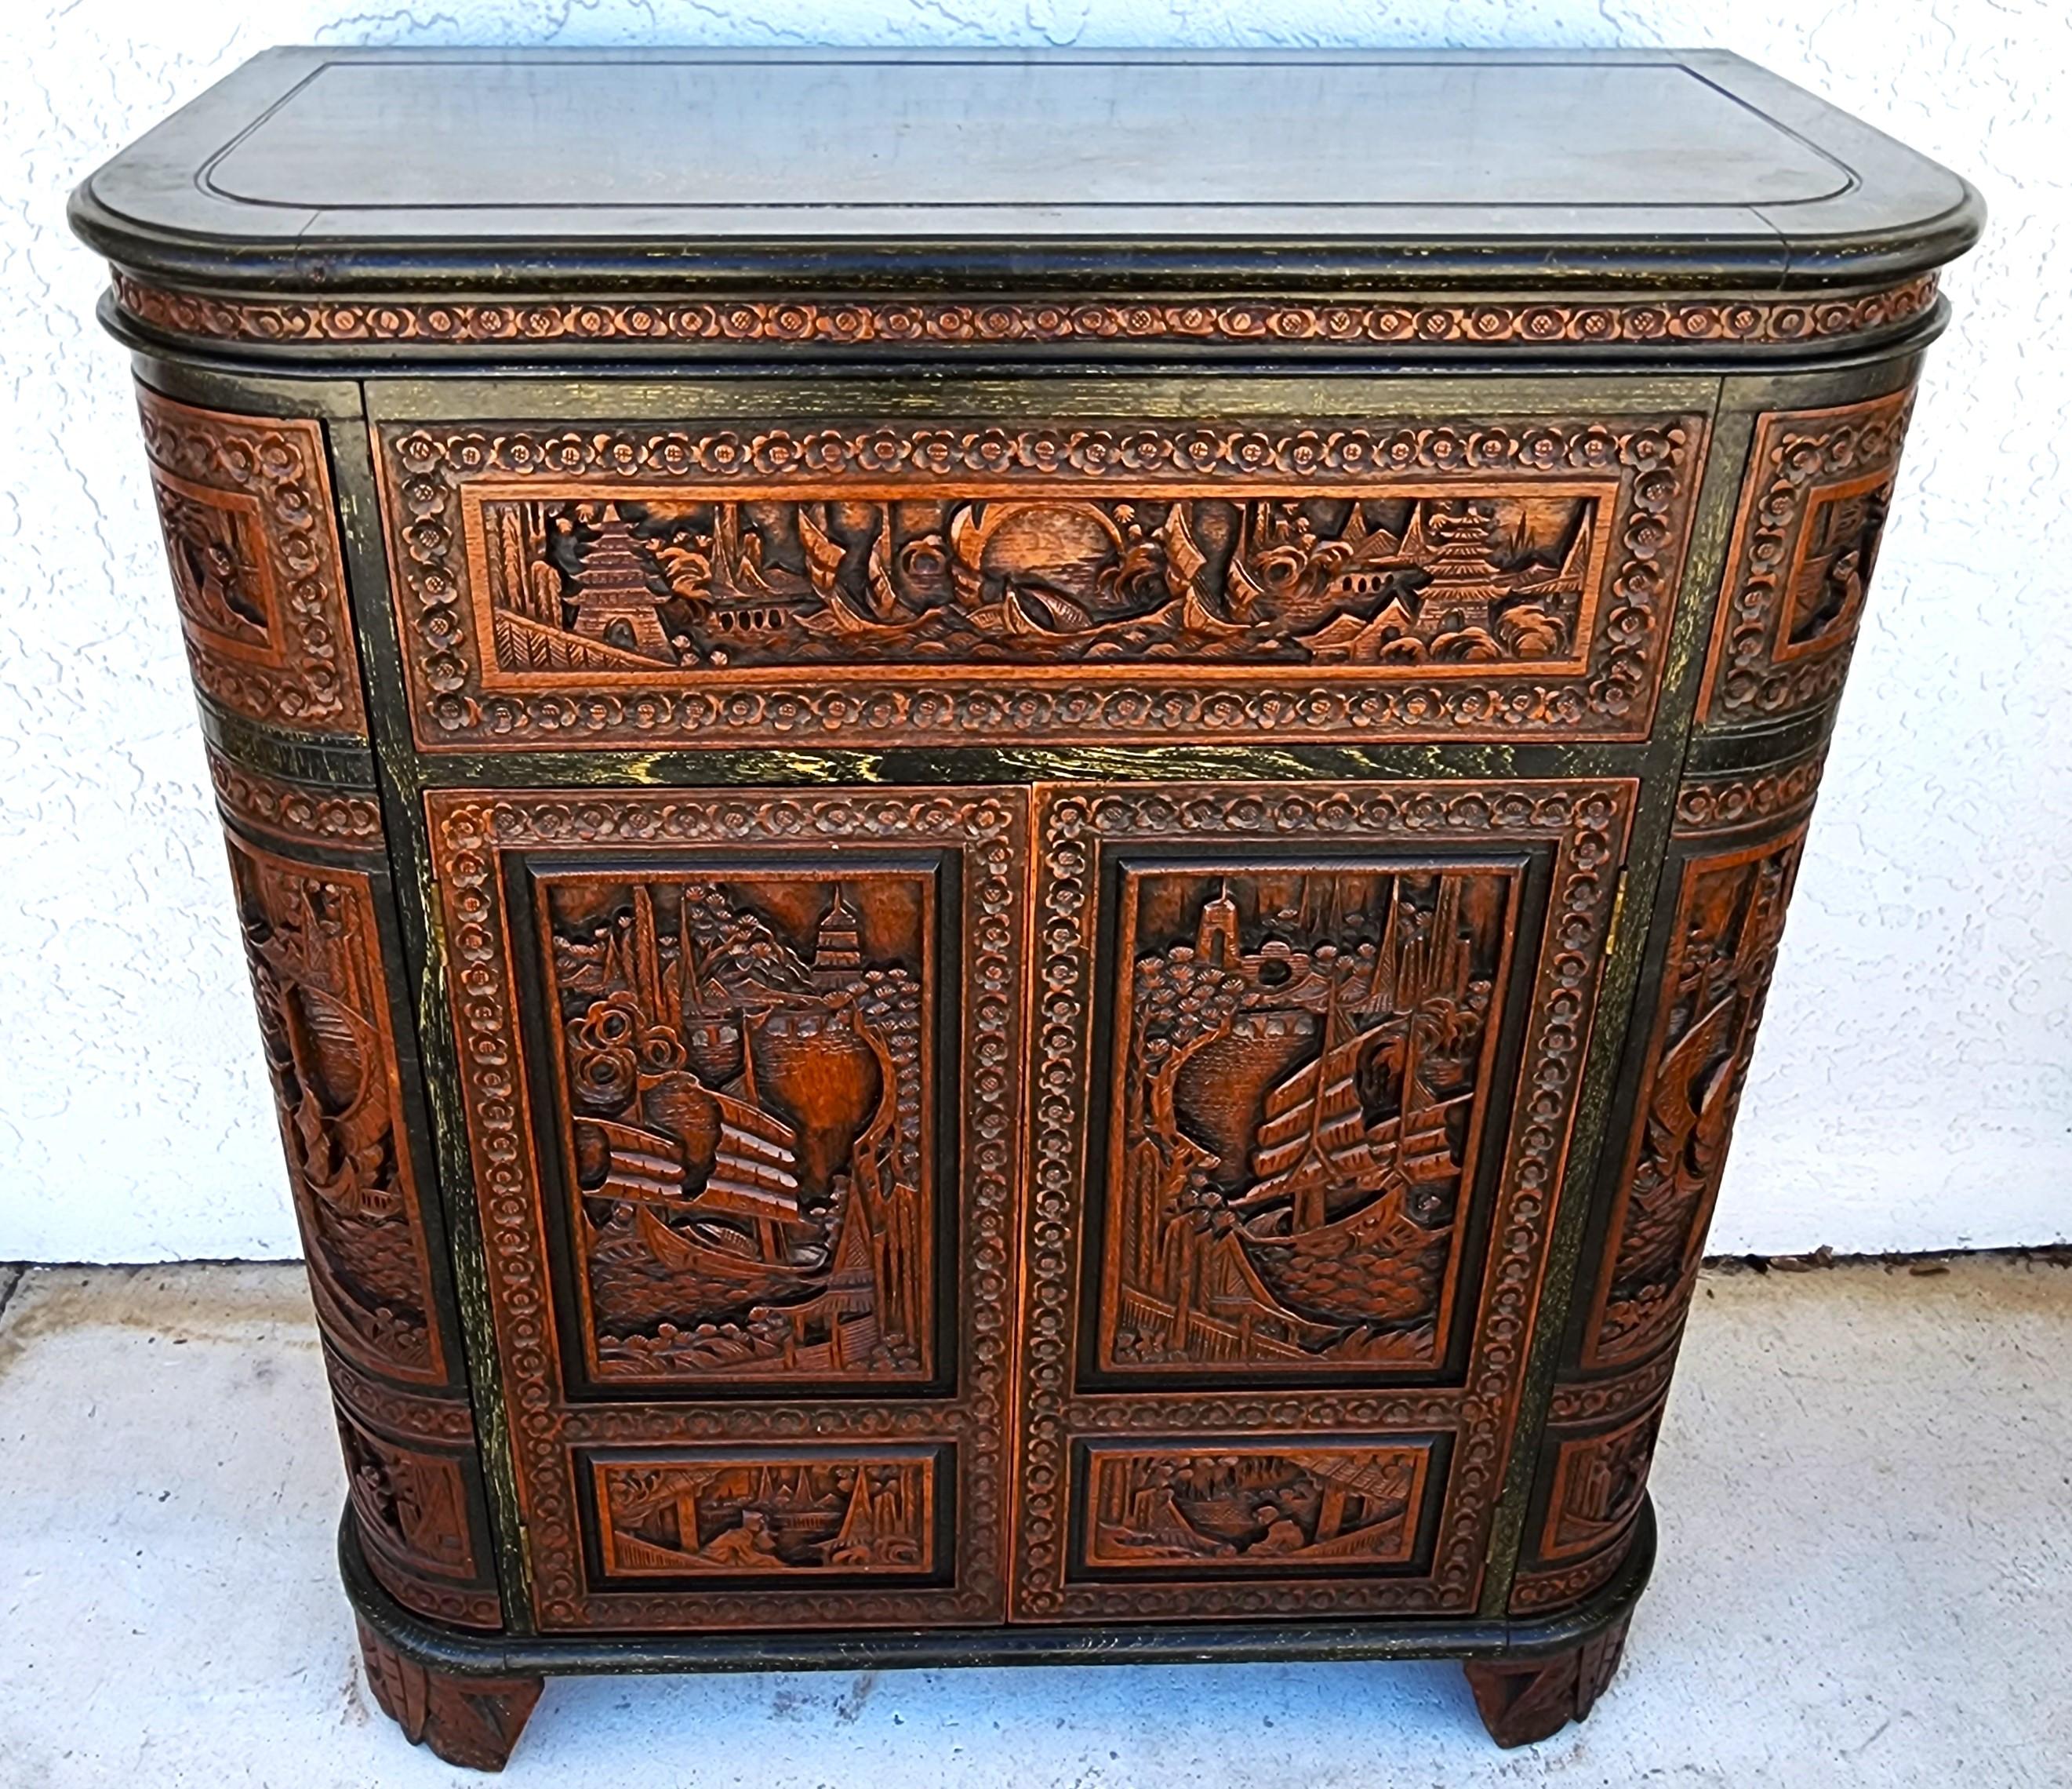 For FULL item description click on CONTINUE READING at the bottom of this page.

Offering One Of Our Recent Palm Beach Estate Fine Furniture Acquisitions Of A
George Zee Mid-Century Hand-Carved Asian Chinoiserie Bar Cabinet Rosewood Flip